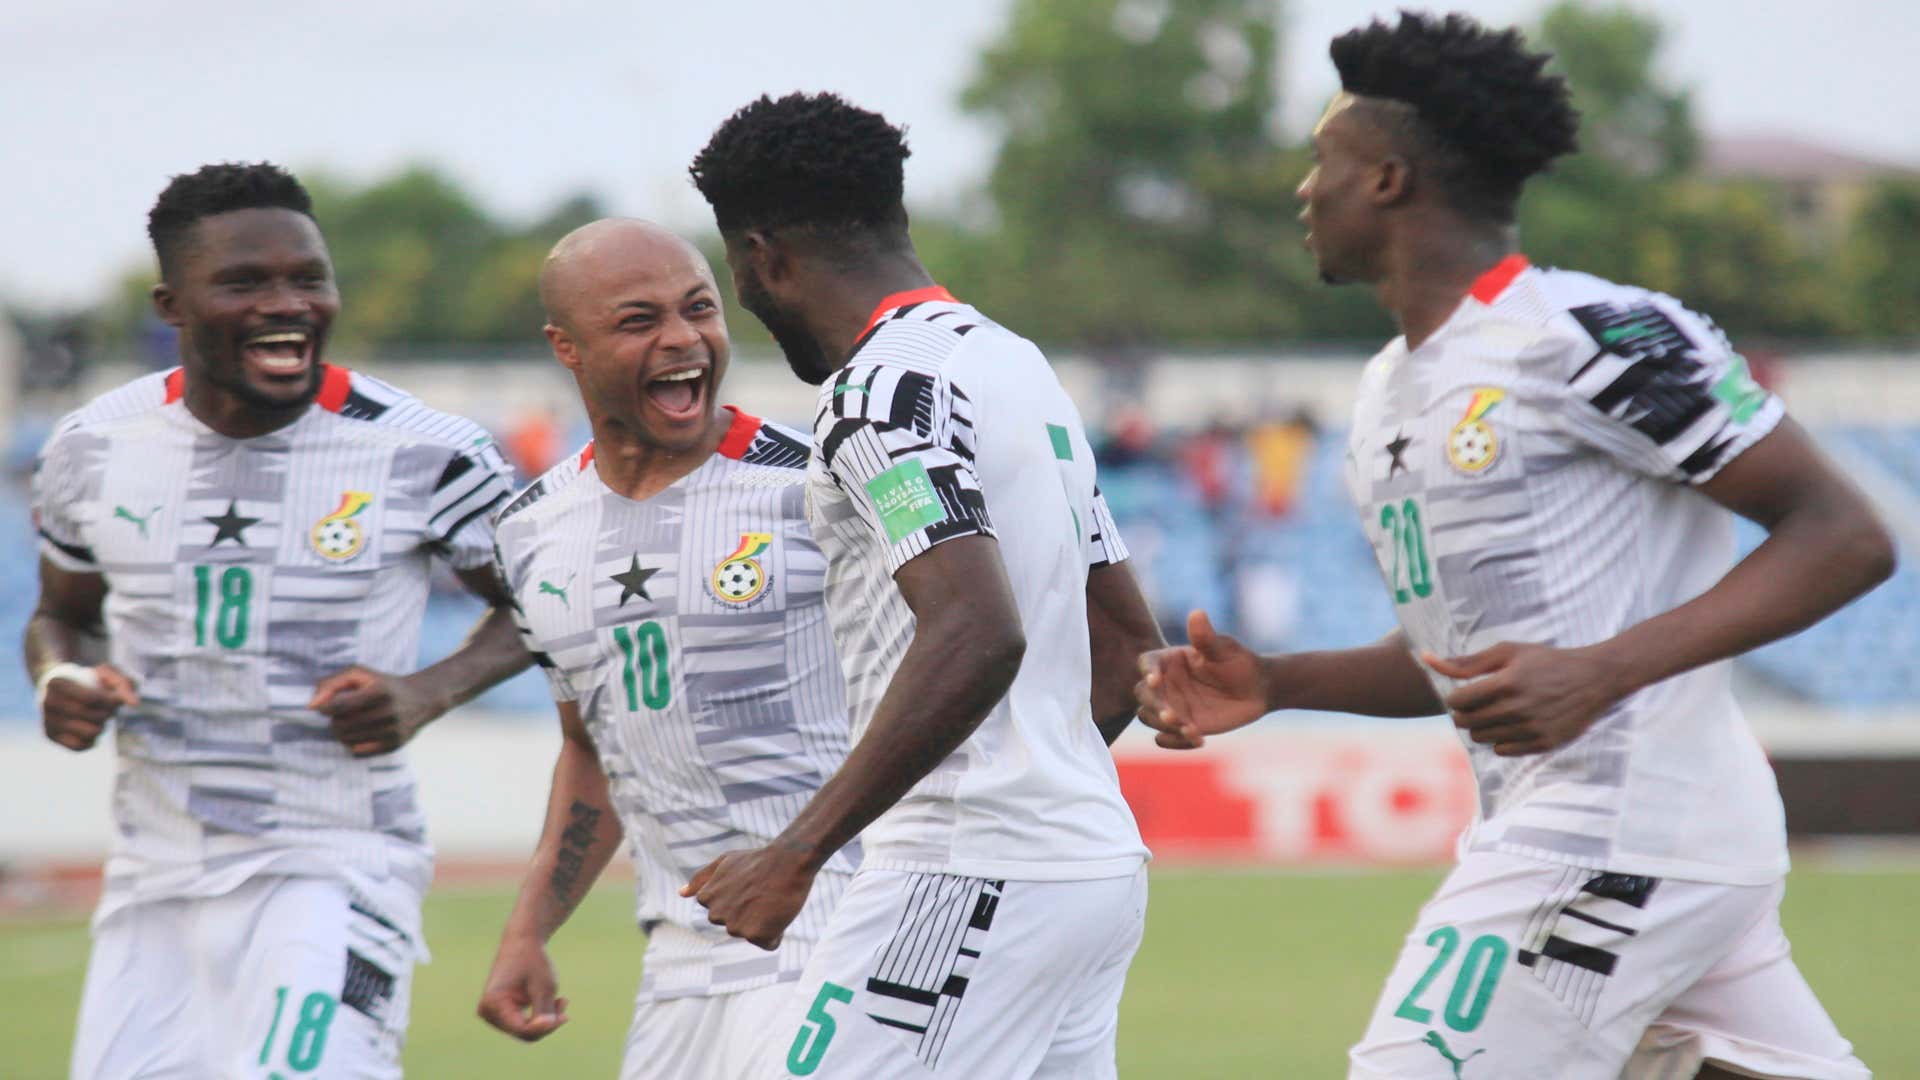 2022 World Cup qualifying: Partey’s goal wins Ghana massive three points as pressure mounts on South Africa